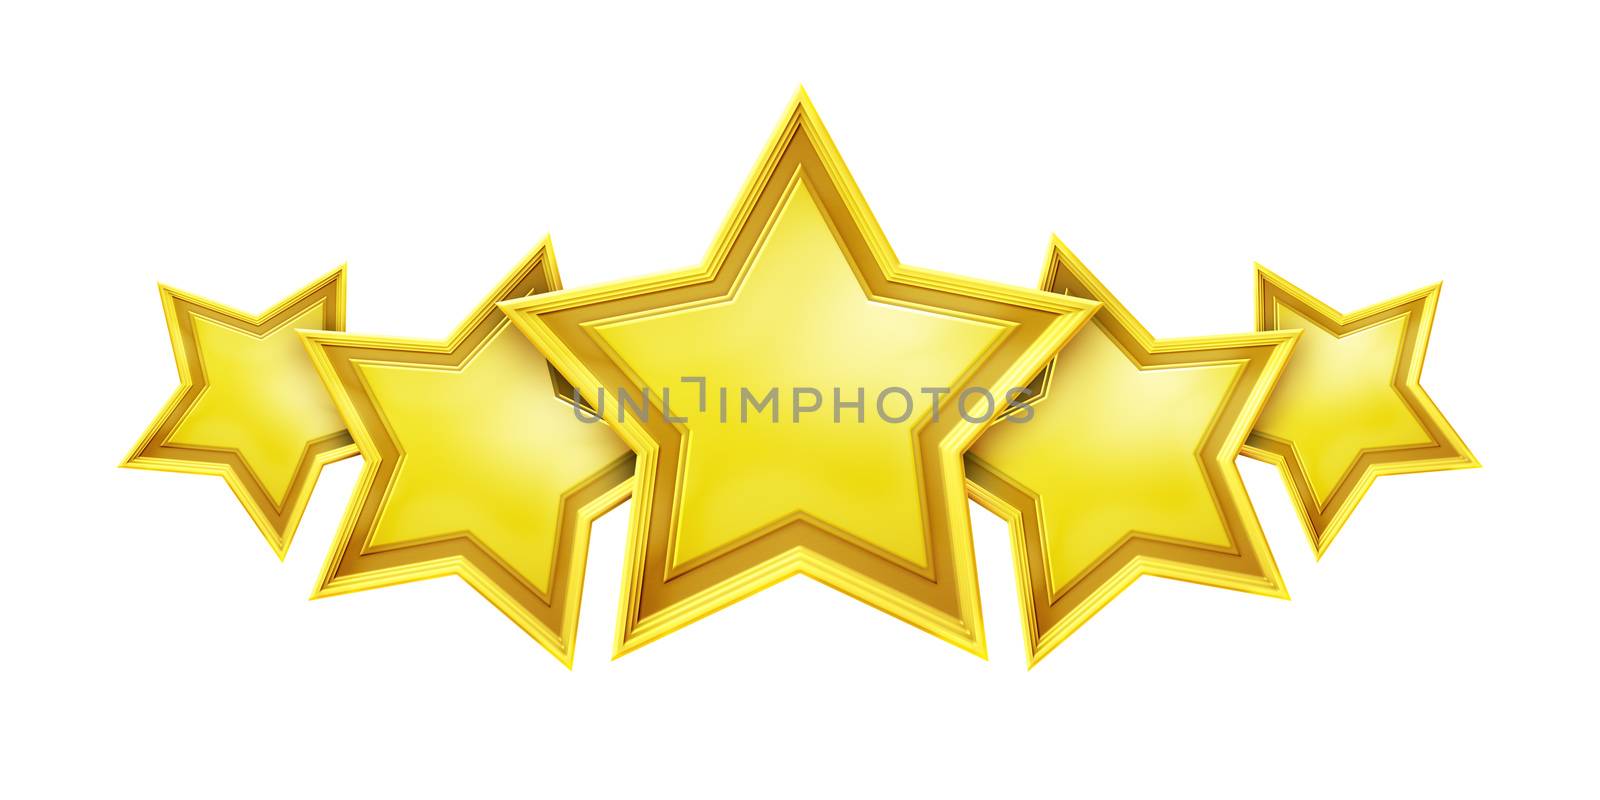 An image of a five star rating service